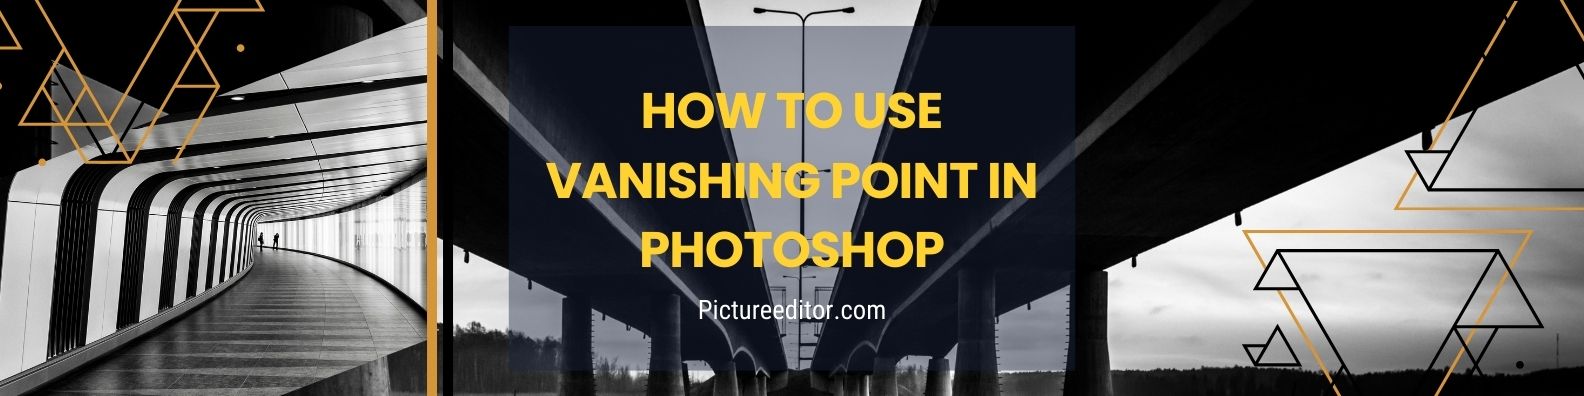 How To Use Vanishing Point In Photoshop